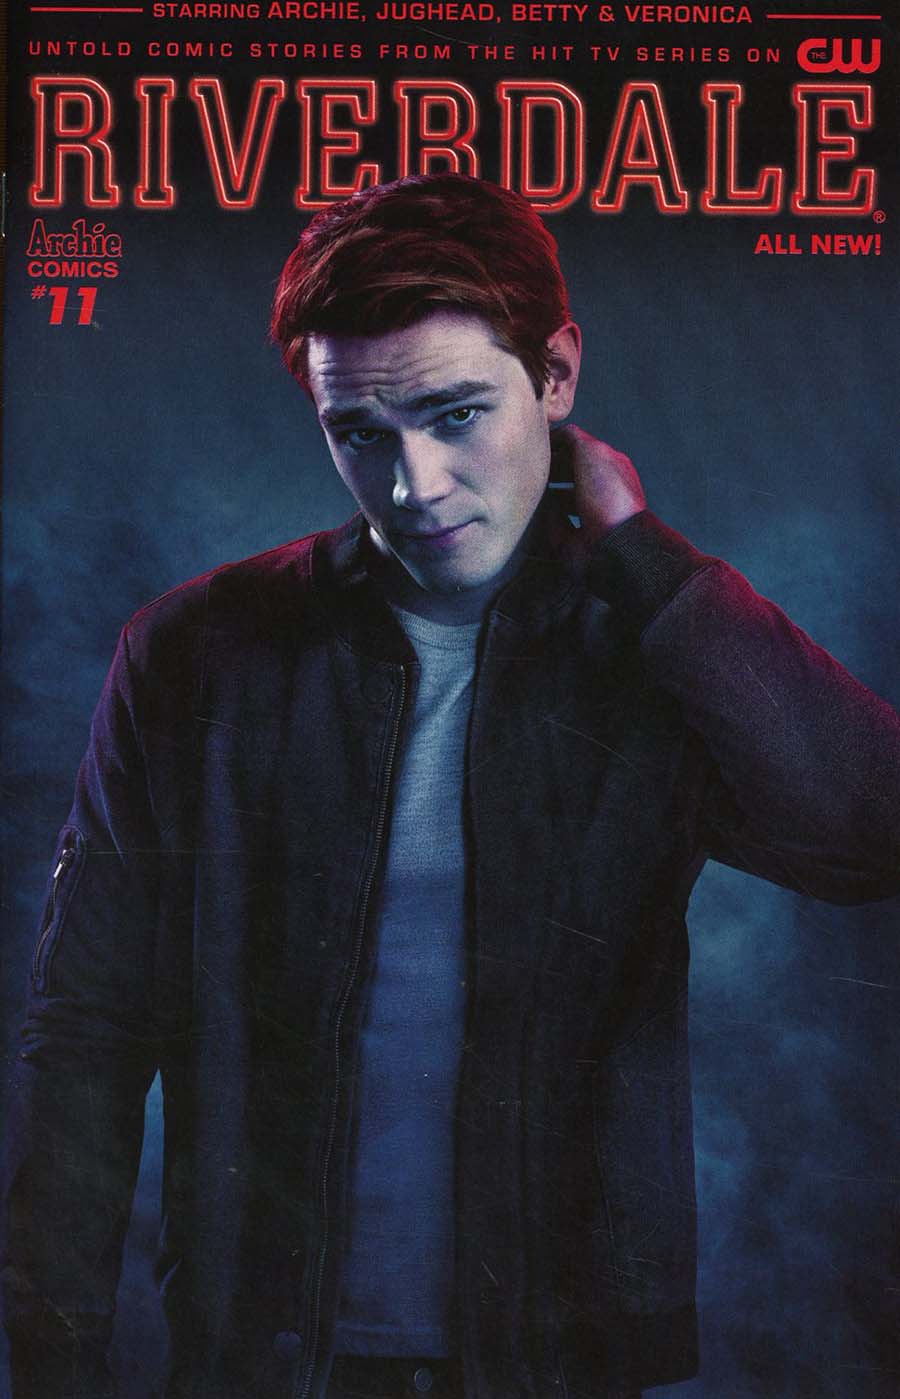 Riverdale #11 Cover A Regular CW Photo Cover